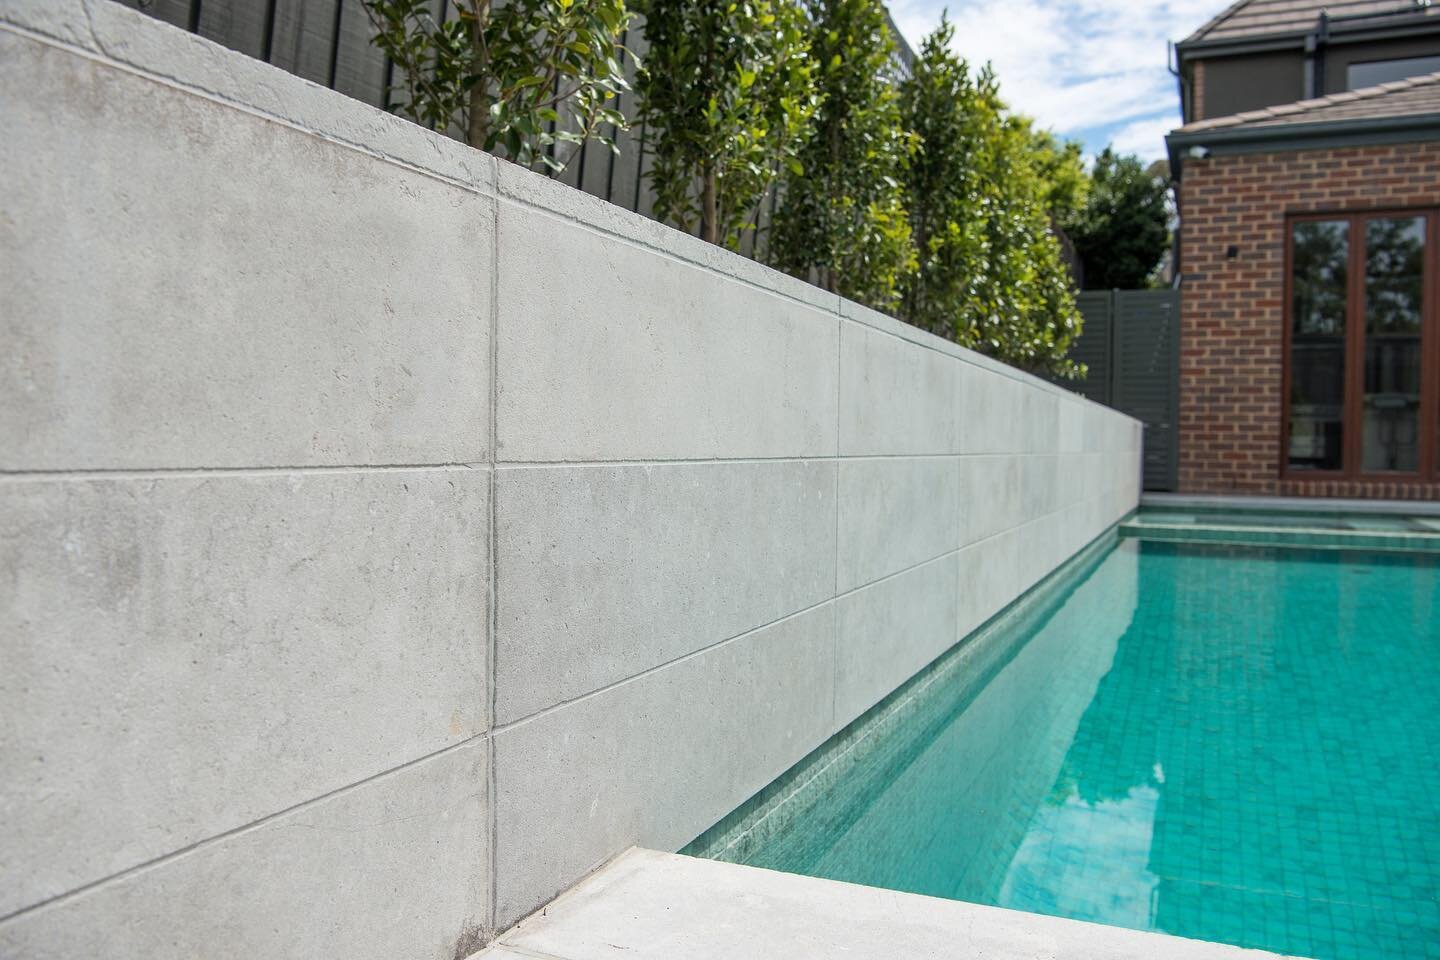 Getting the right backdrop for a pool is never an easy decision, in this case the customers absolutely nailed it by keeping the limestone flowing from paving onto the planter box.

@neptunepoolsoz 
@canterburystone 

#landscapephotography #landscapep